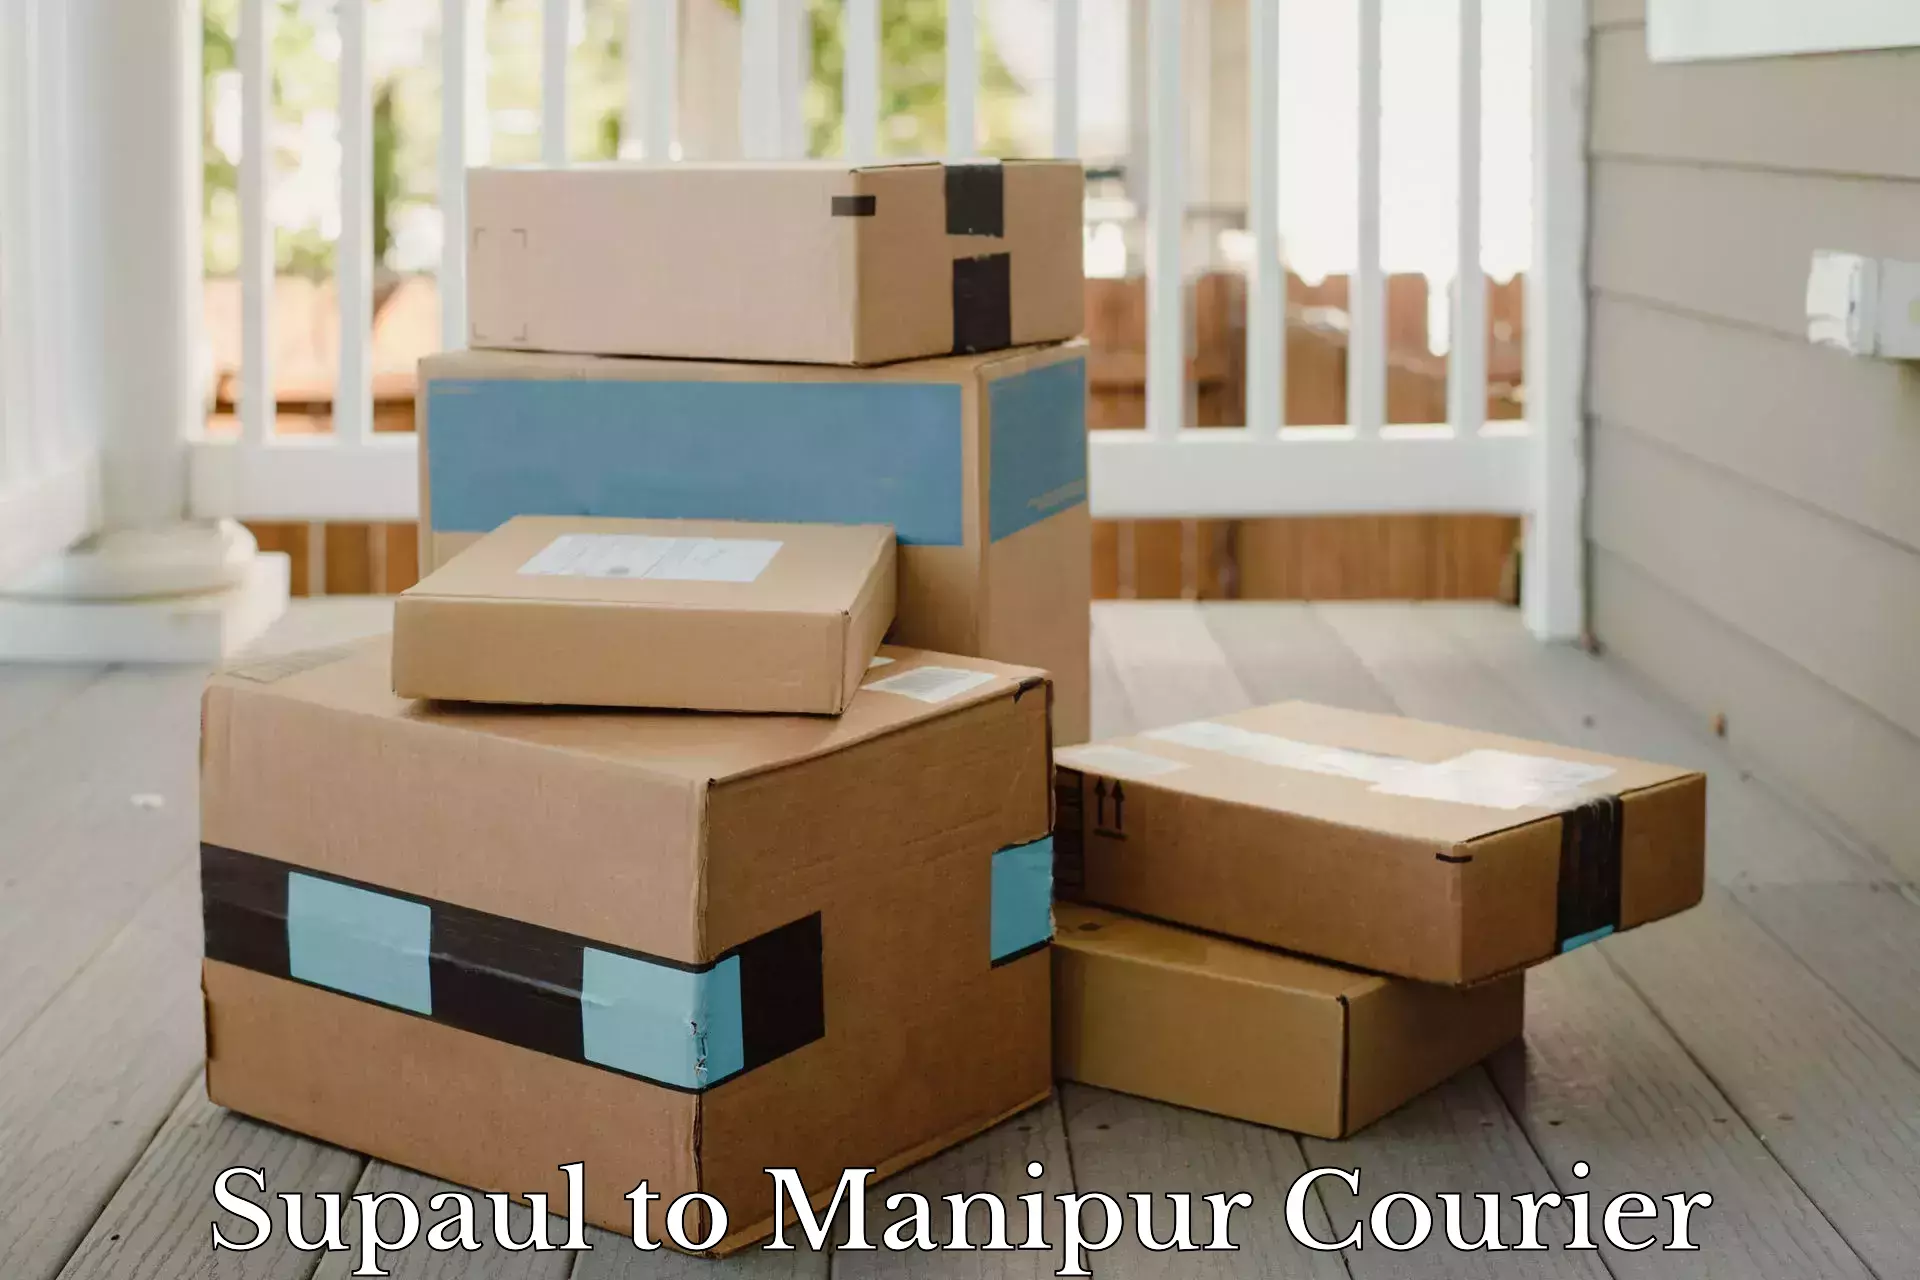 Round-the-clock parcel delivery Supaul to Manipur